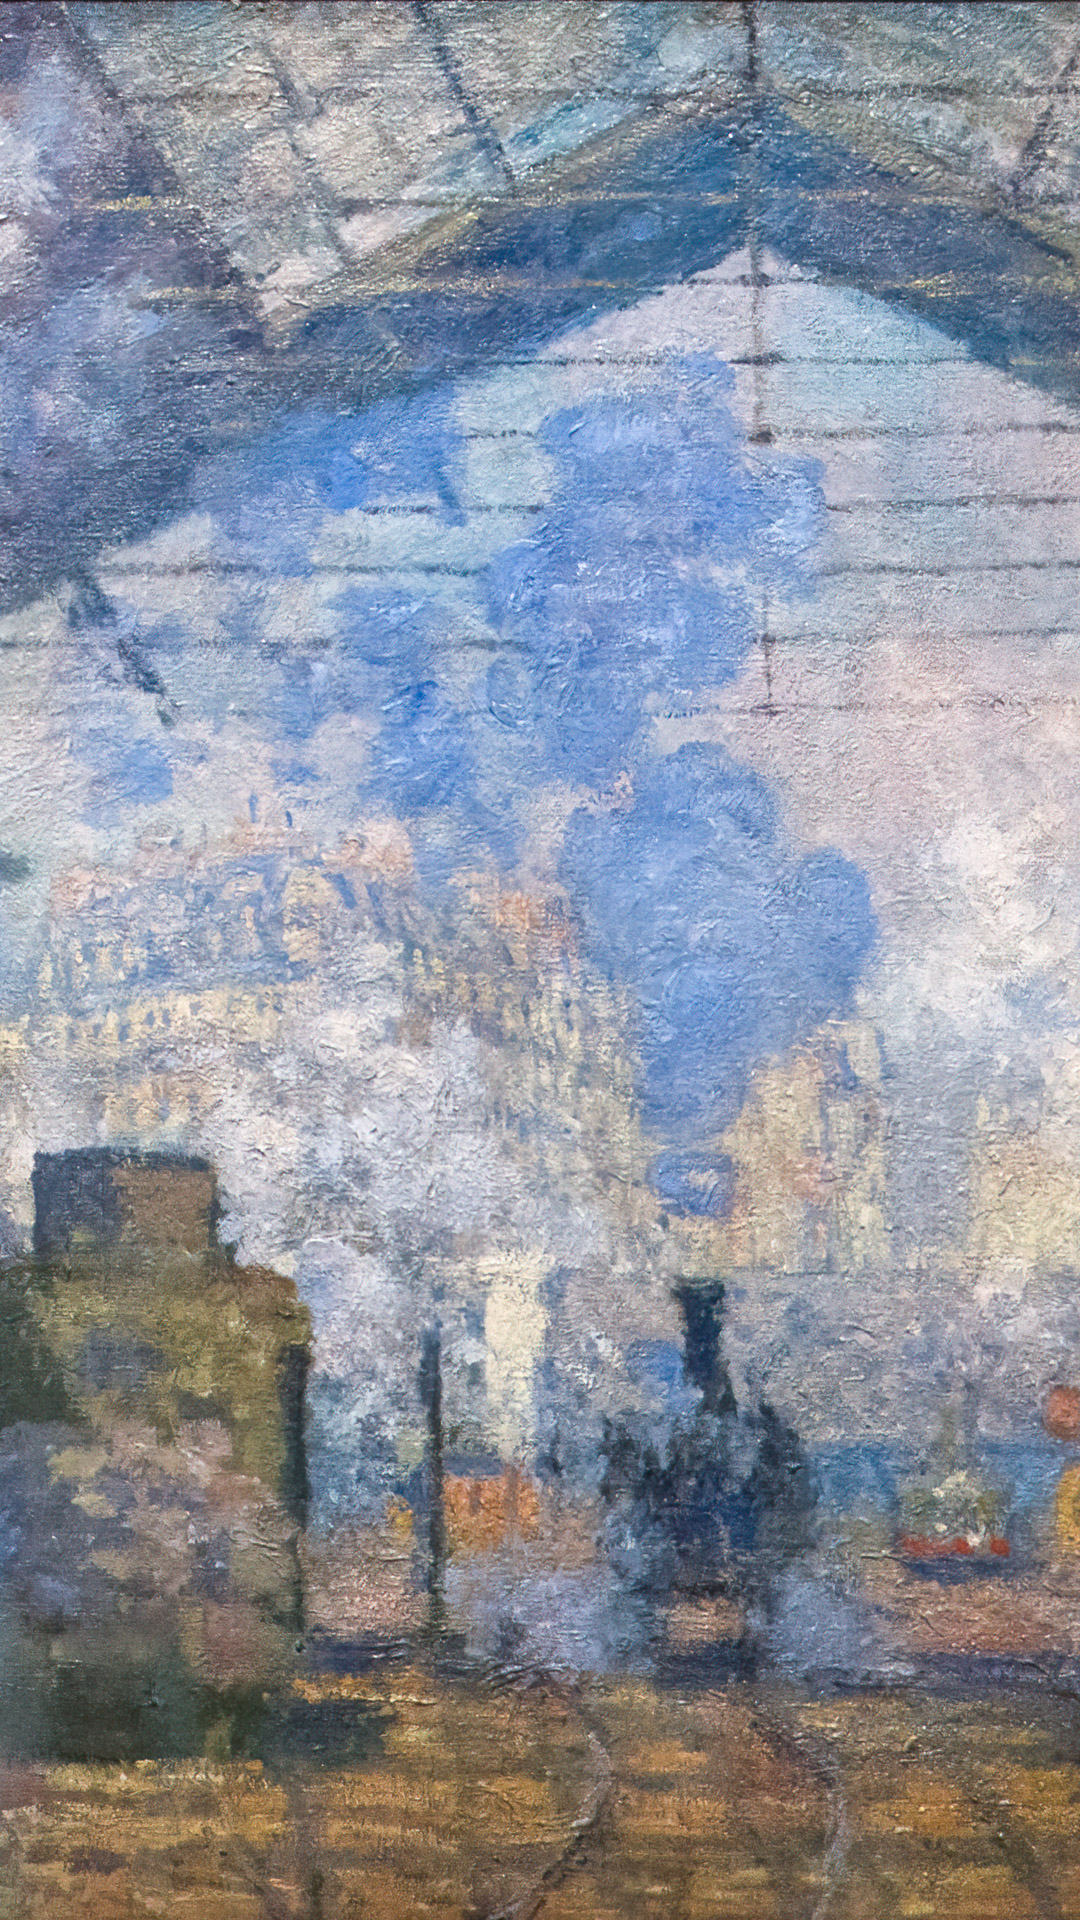 Experience the enchanting beauty of Monet's masterpieces on your iPhone with our wallpaper.